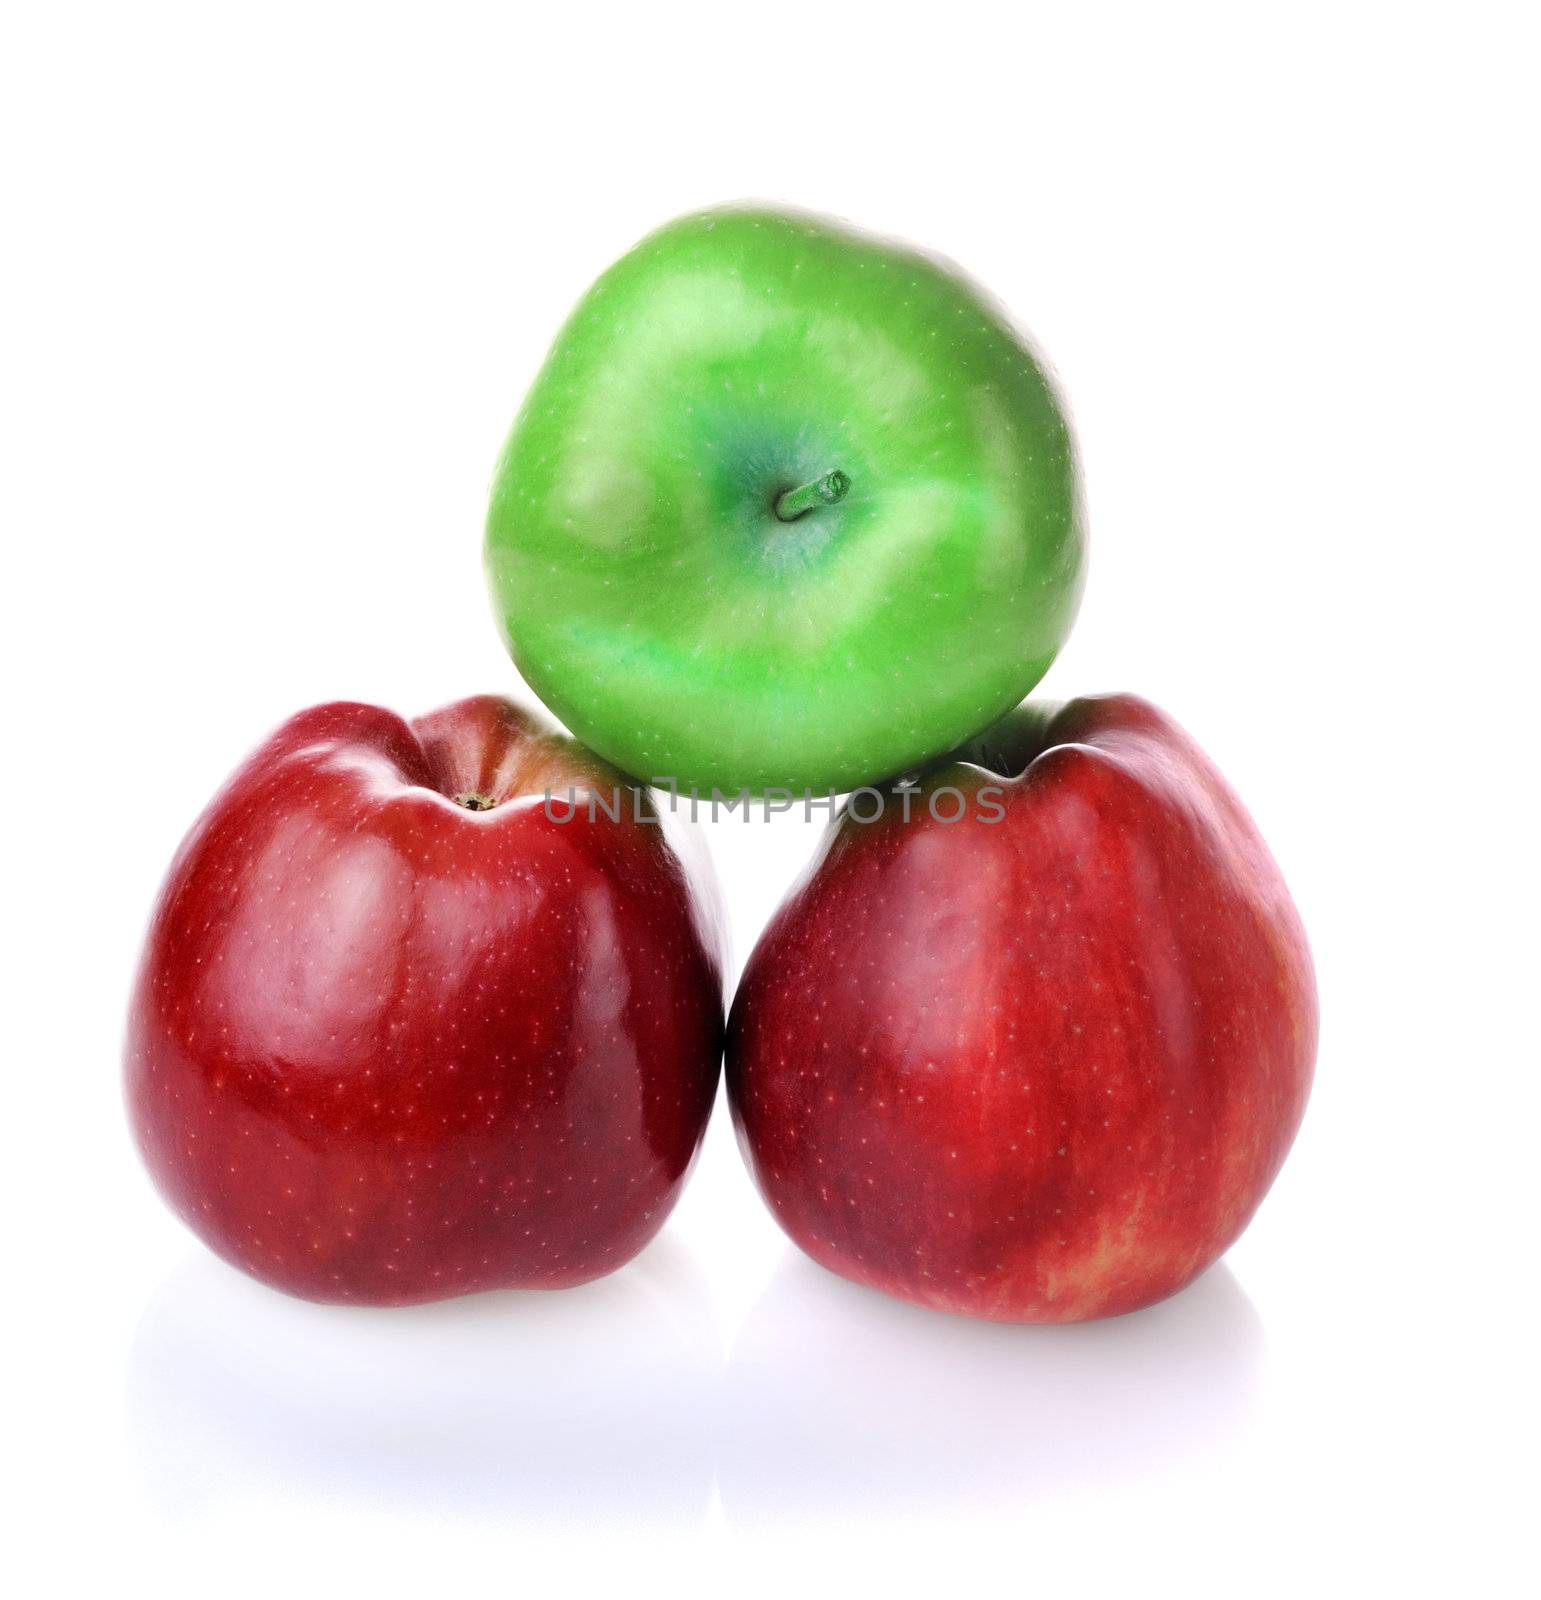 To be different green apple betwen red ones by iryna_rasko